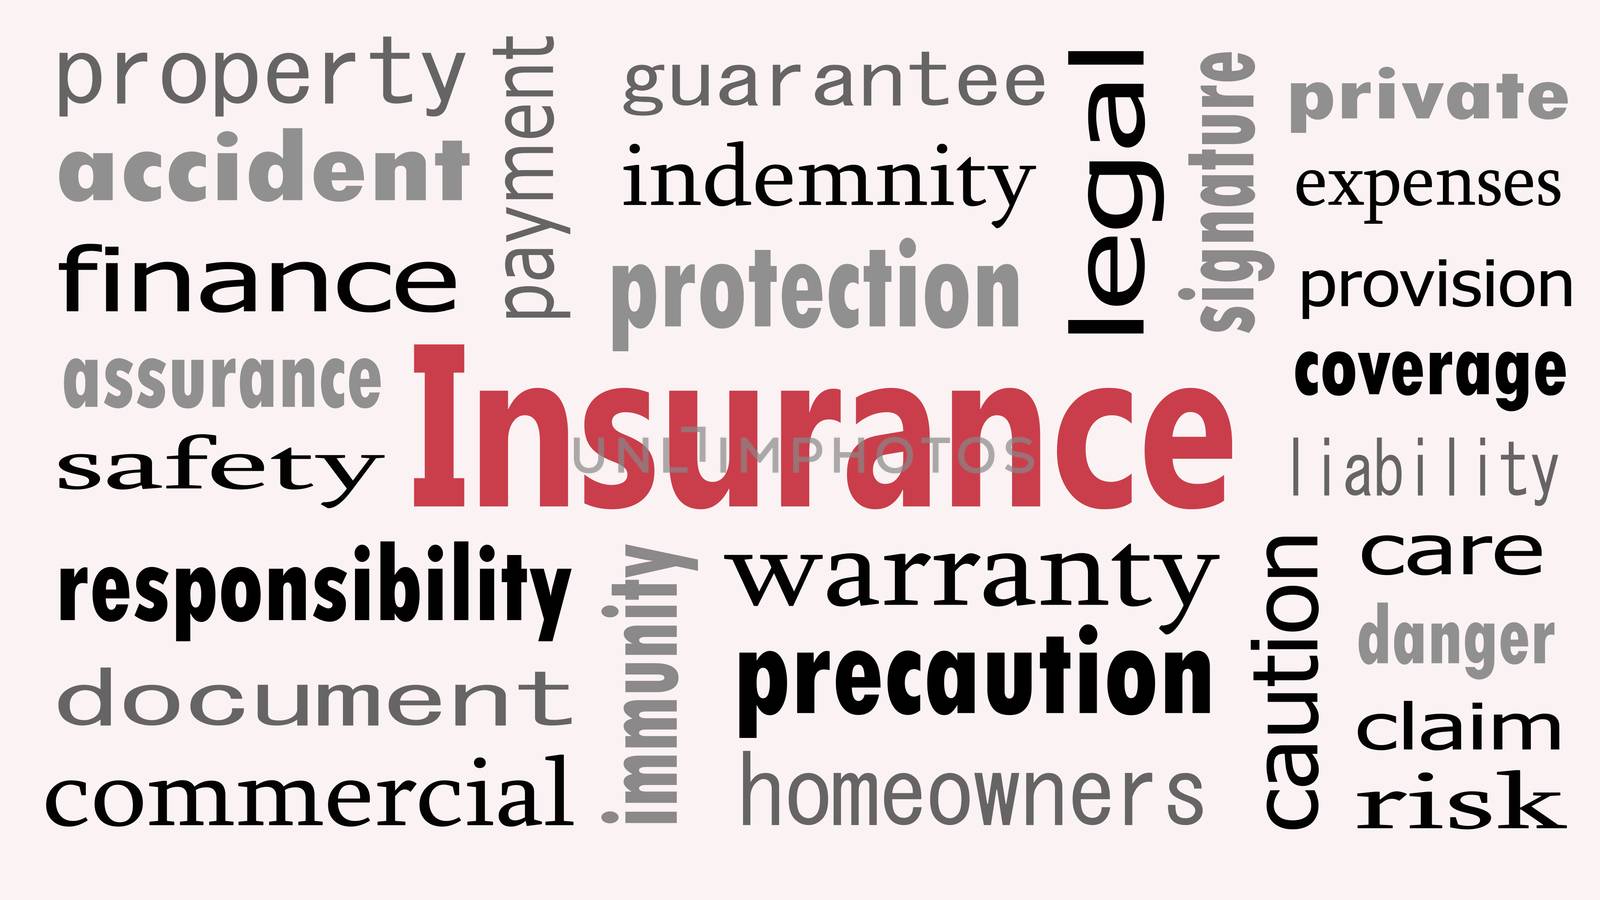 Insurance word cloud concept on white background.